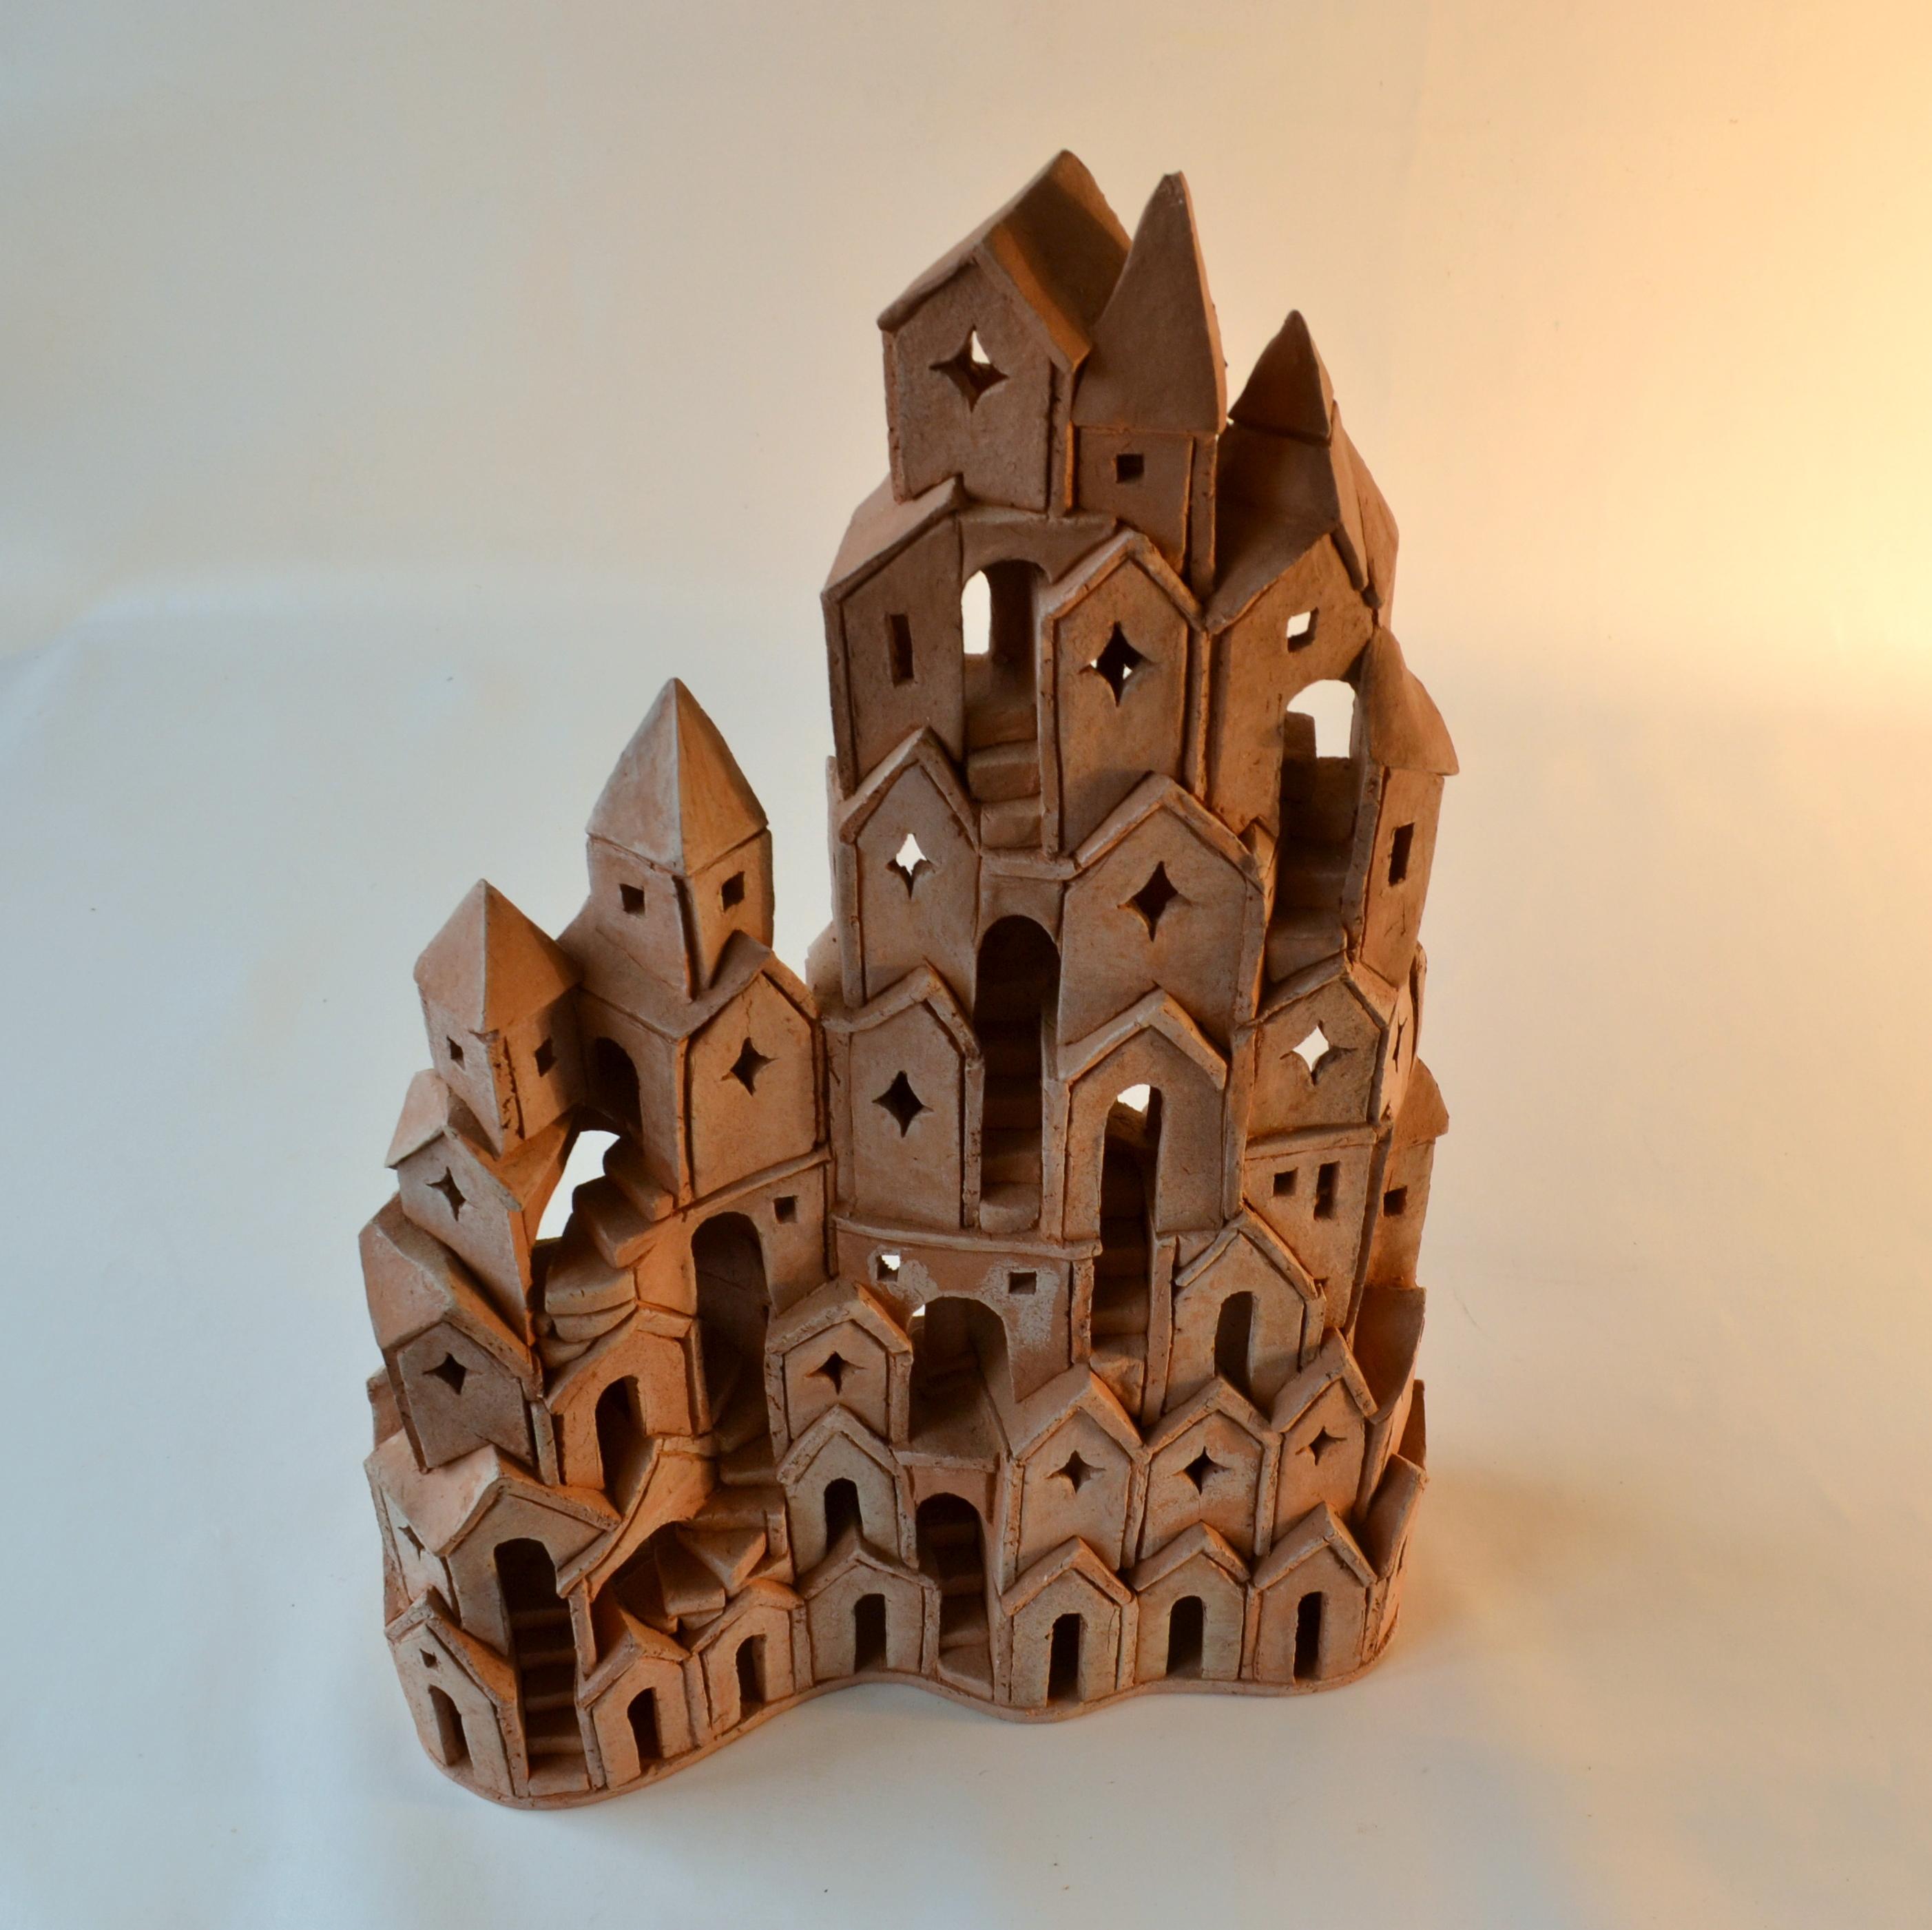 Architectural Surreal Ceramic Tower Sculpture 2 by Dutch Arie Bouter 1995 7